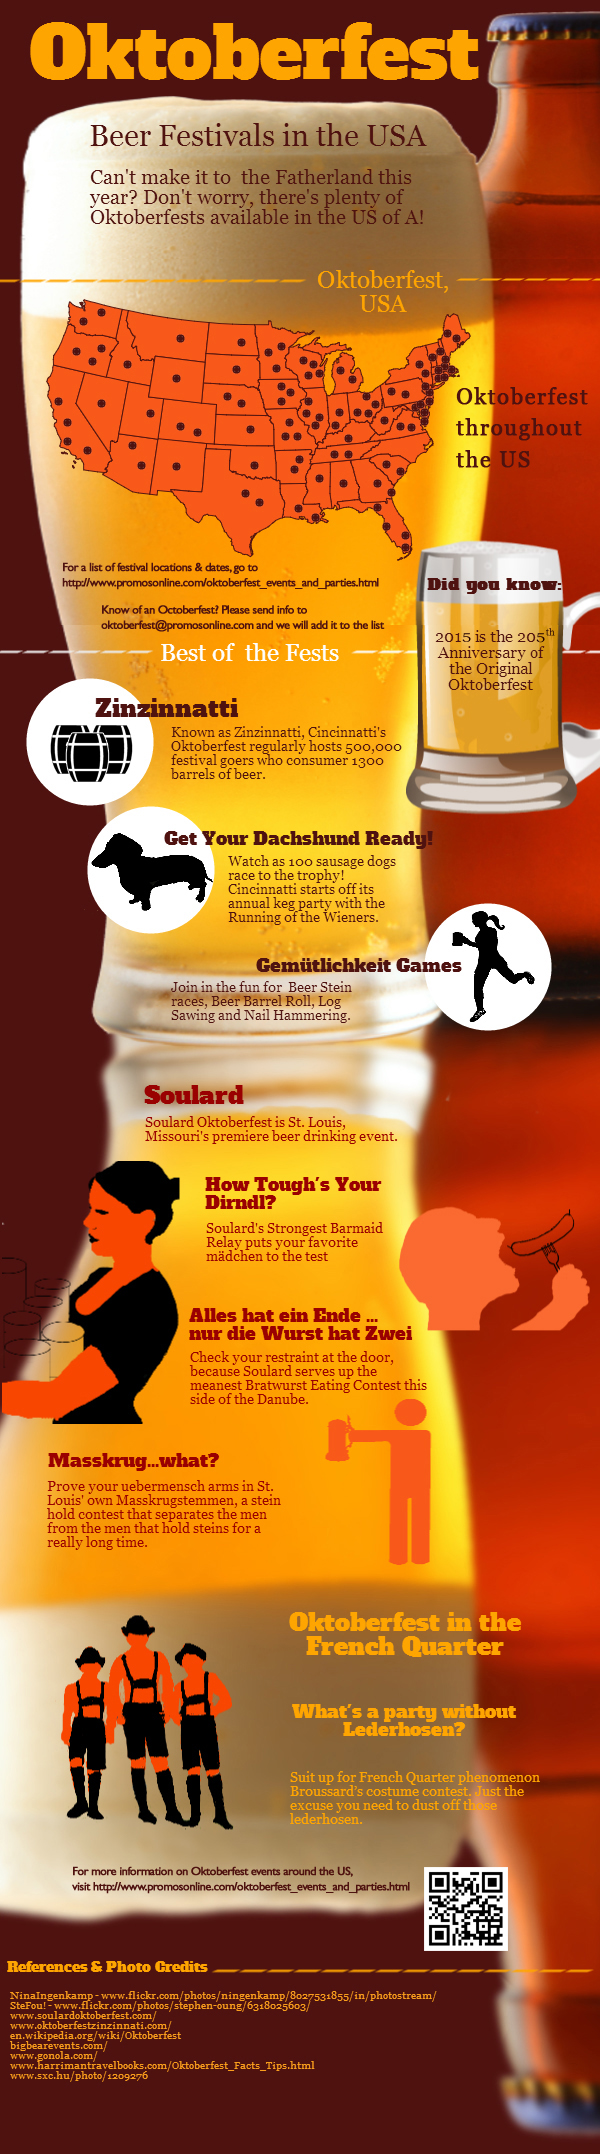 Oktoberfest in the USA Infographic